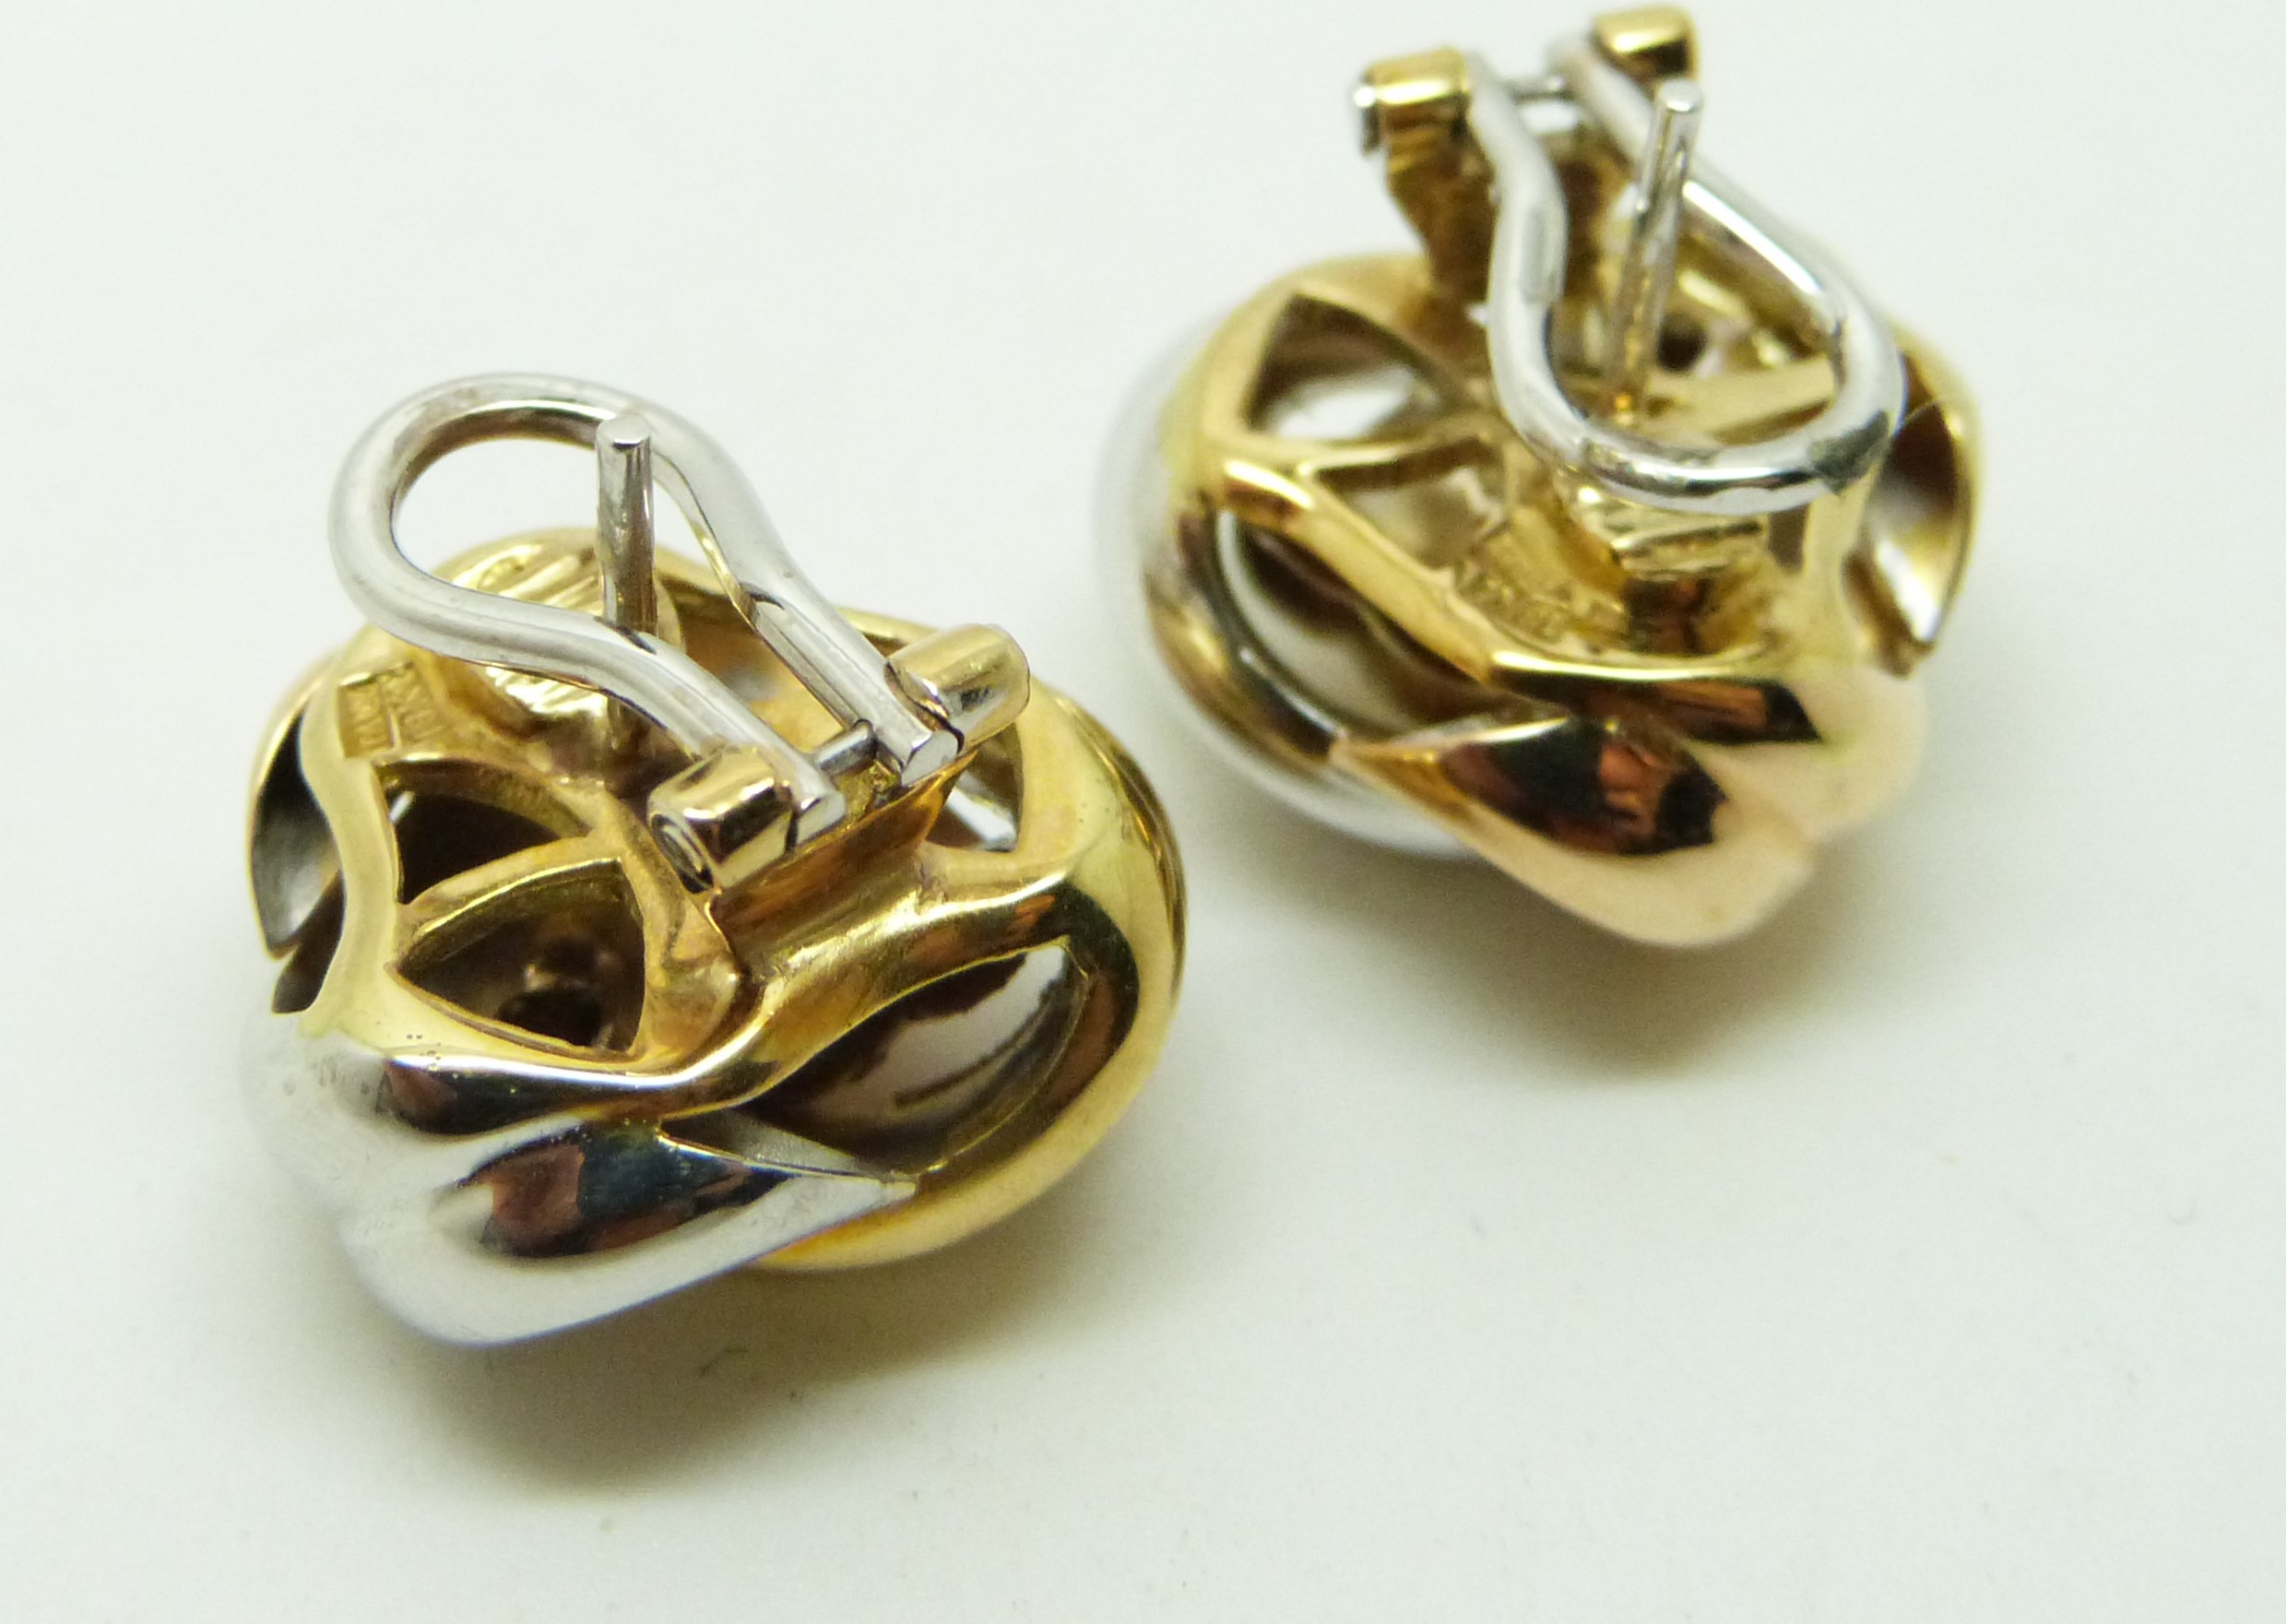 A pair of 18k gold bi-coloured knot earrings - Image 2 of 2